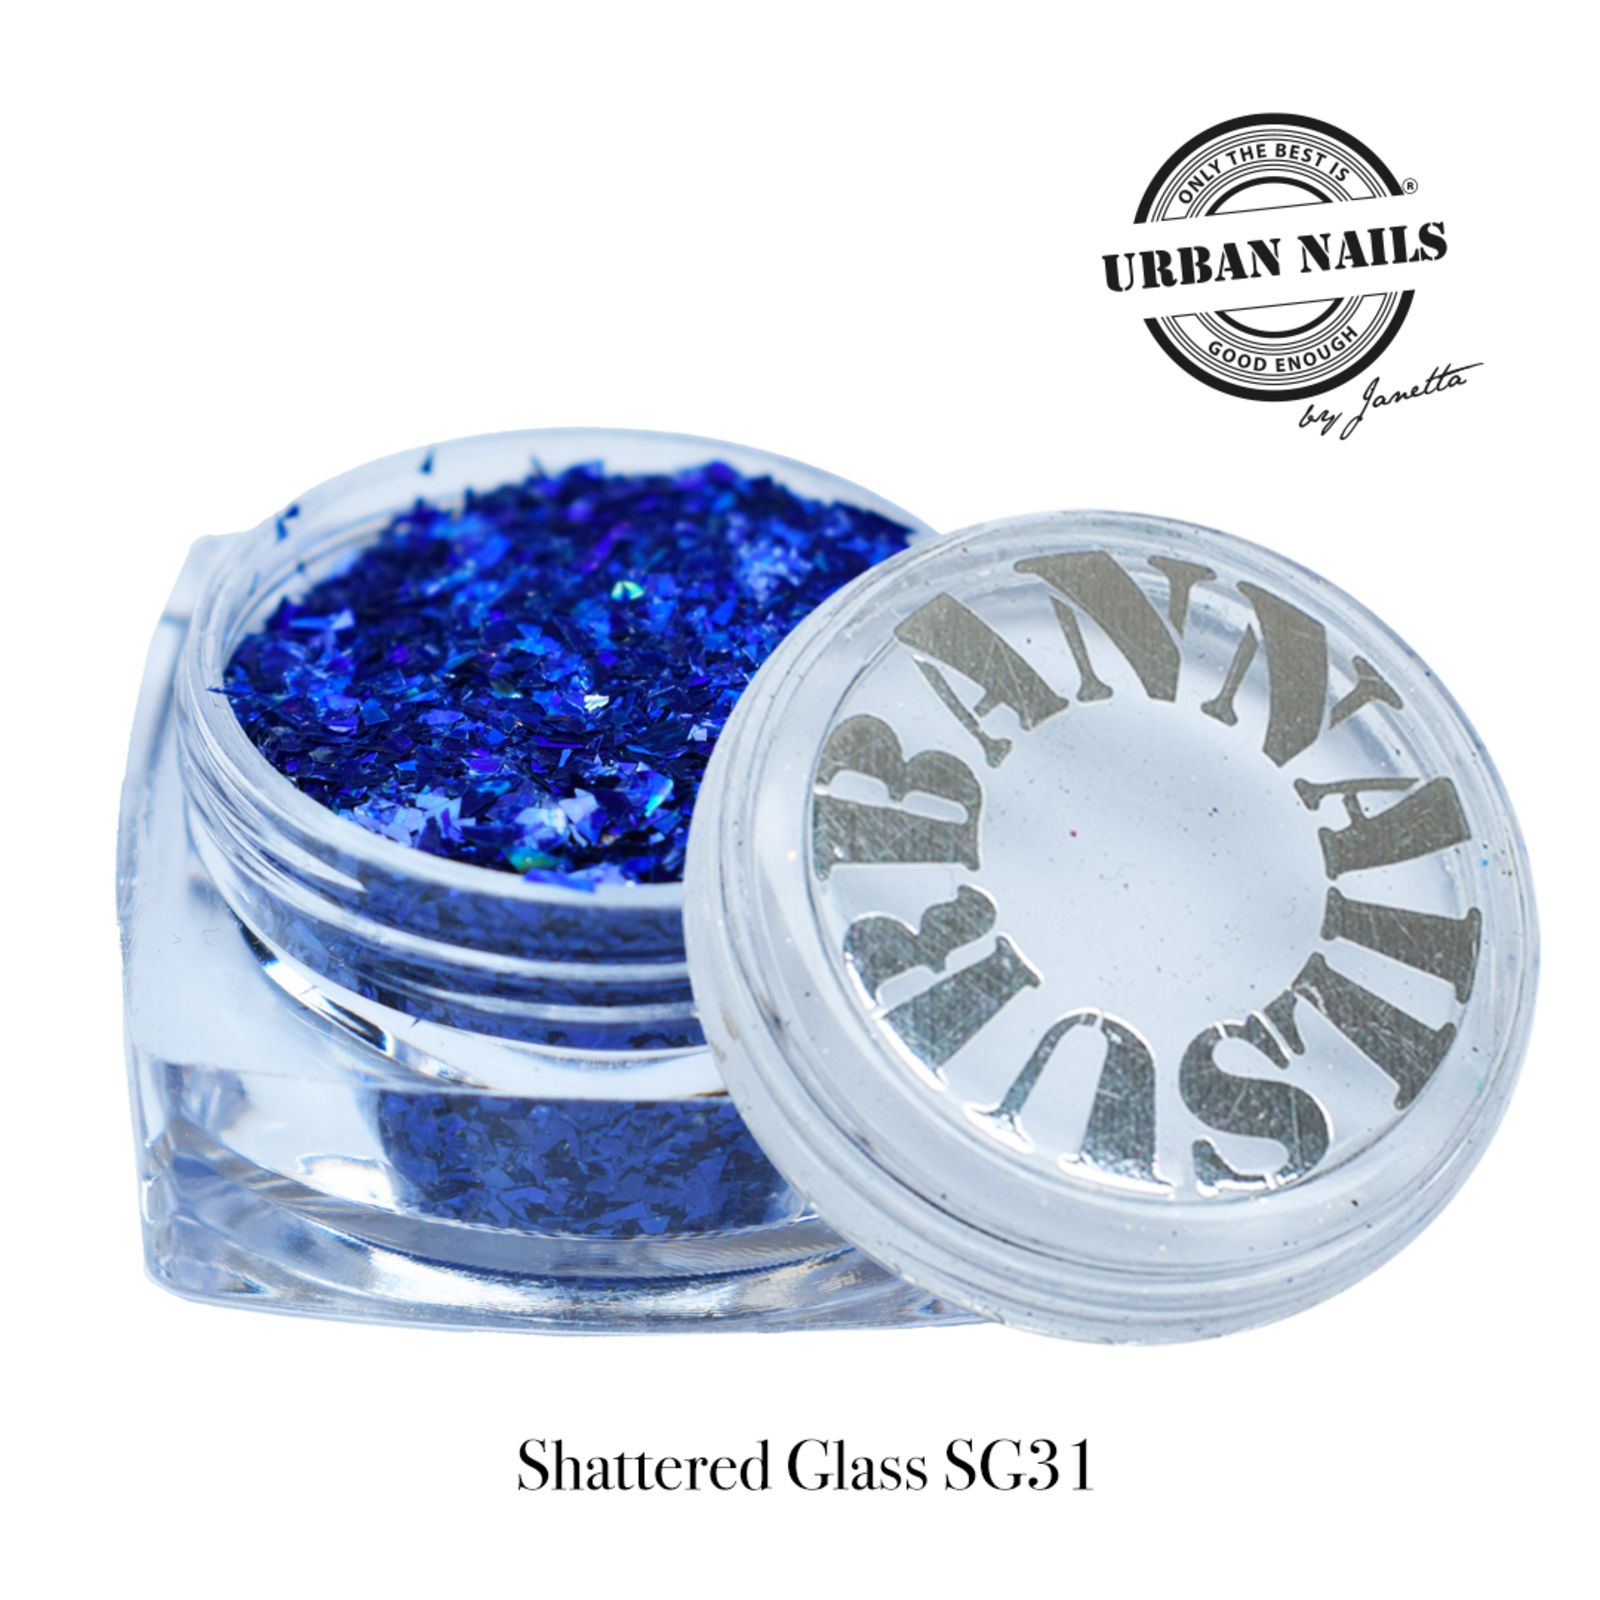 Urban nails Shattered Glass SG31 hologram blauw paars